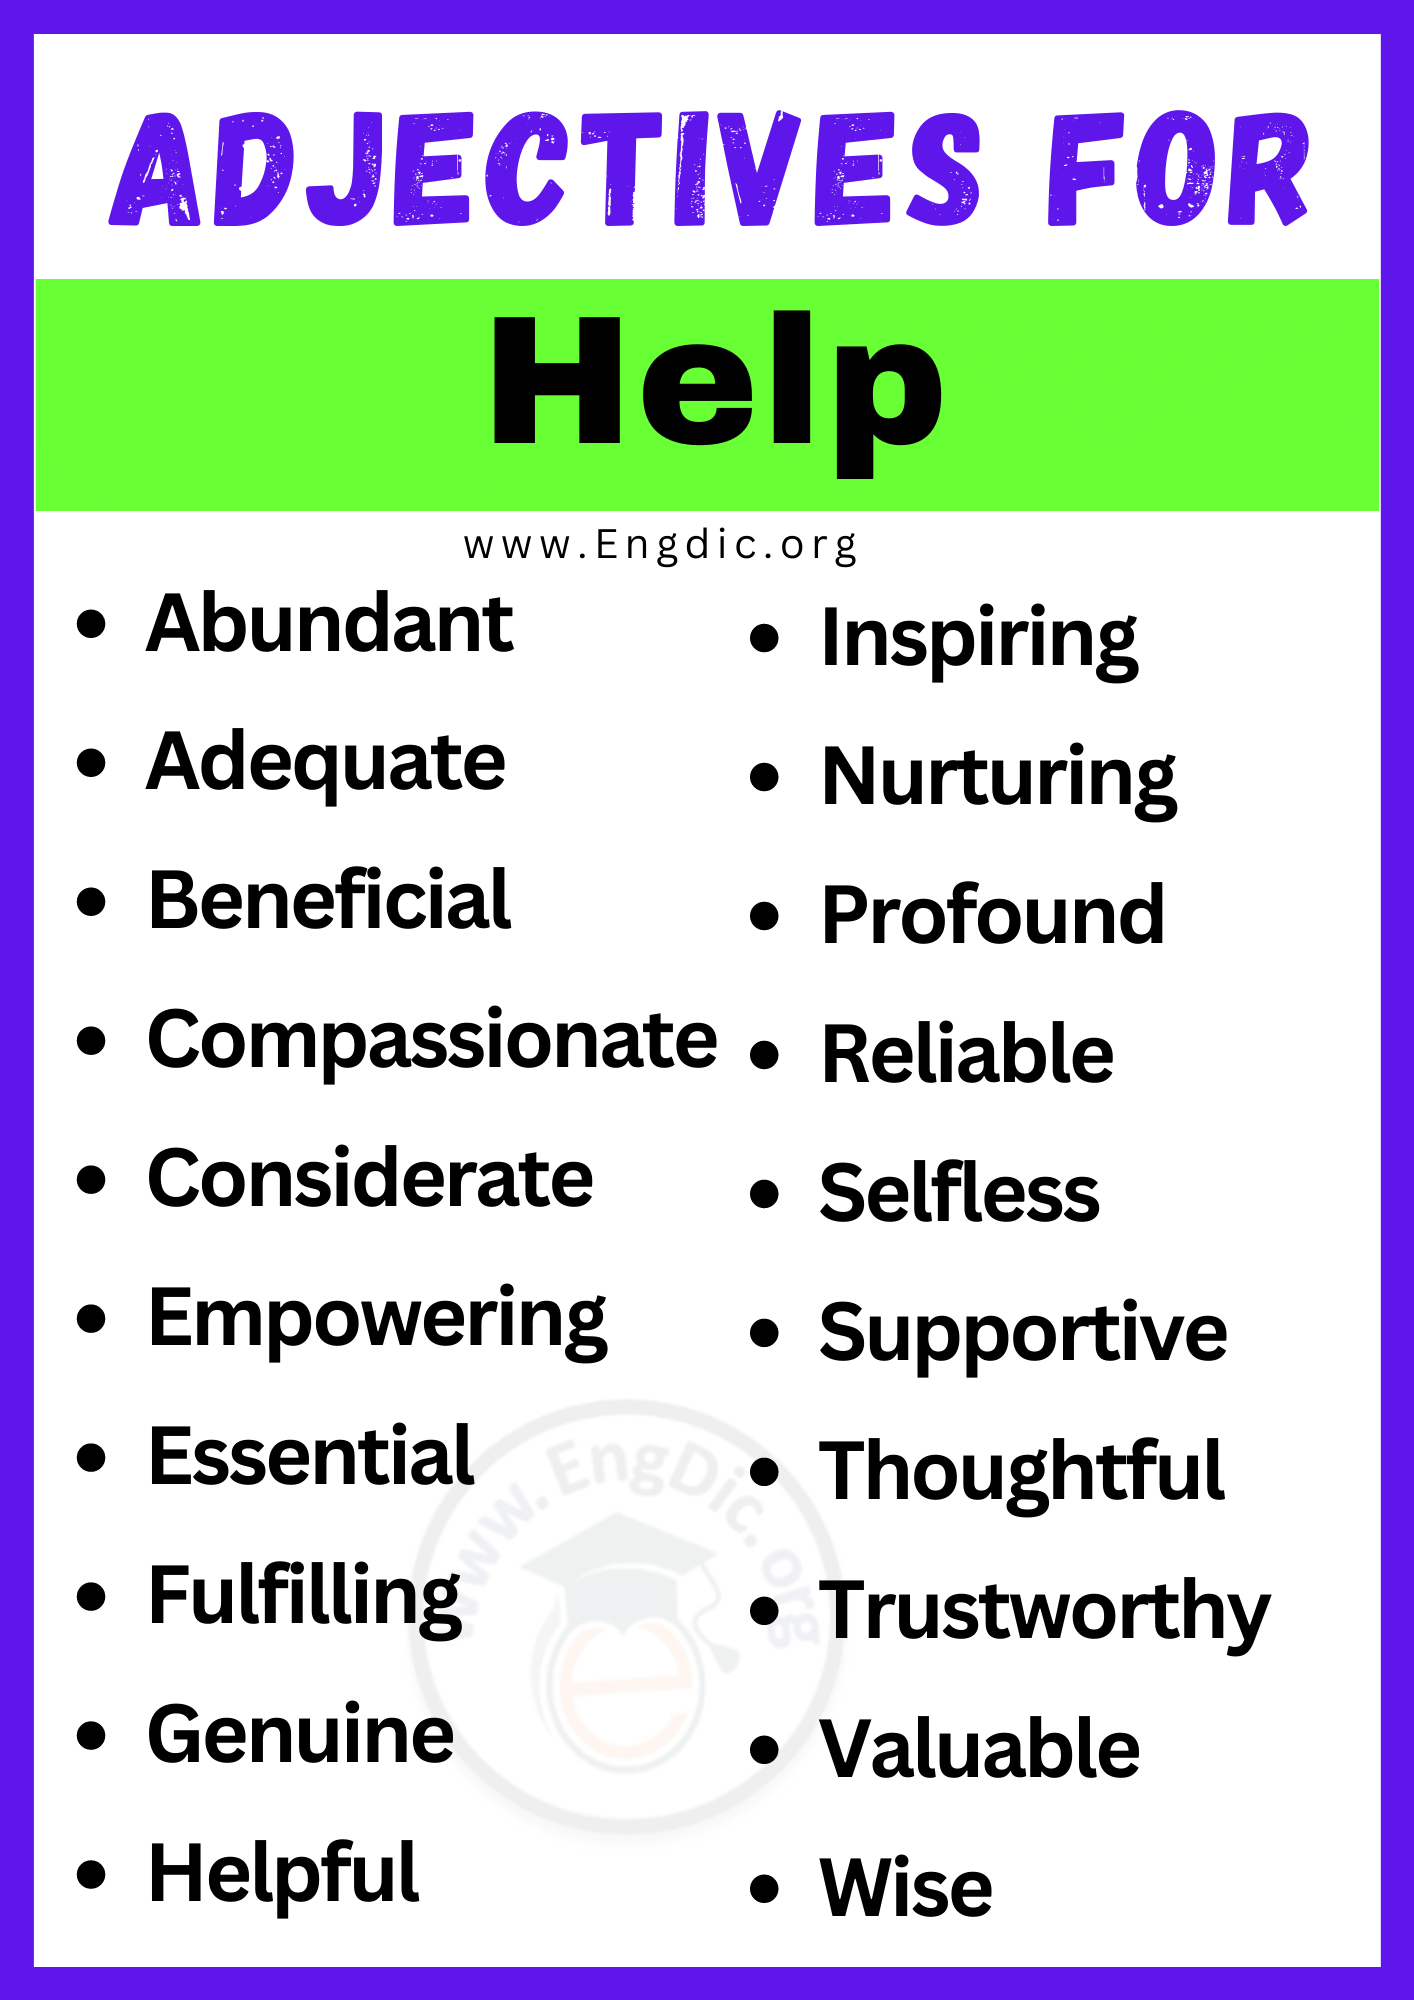 Adjectives for Help